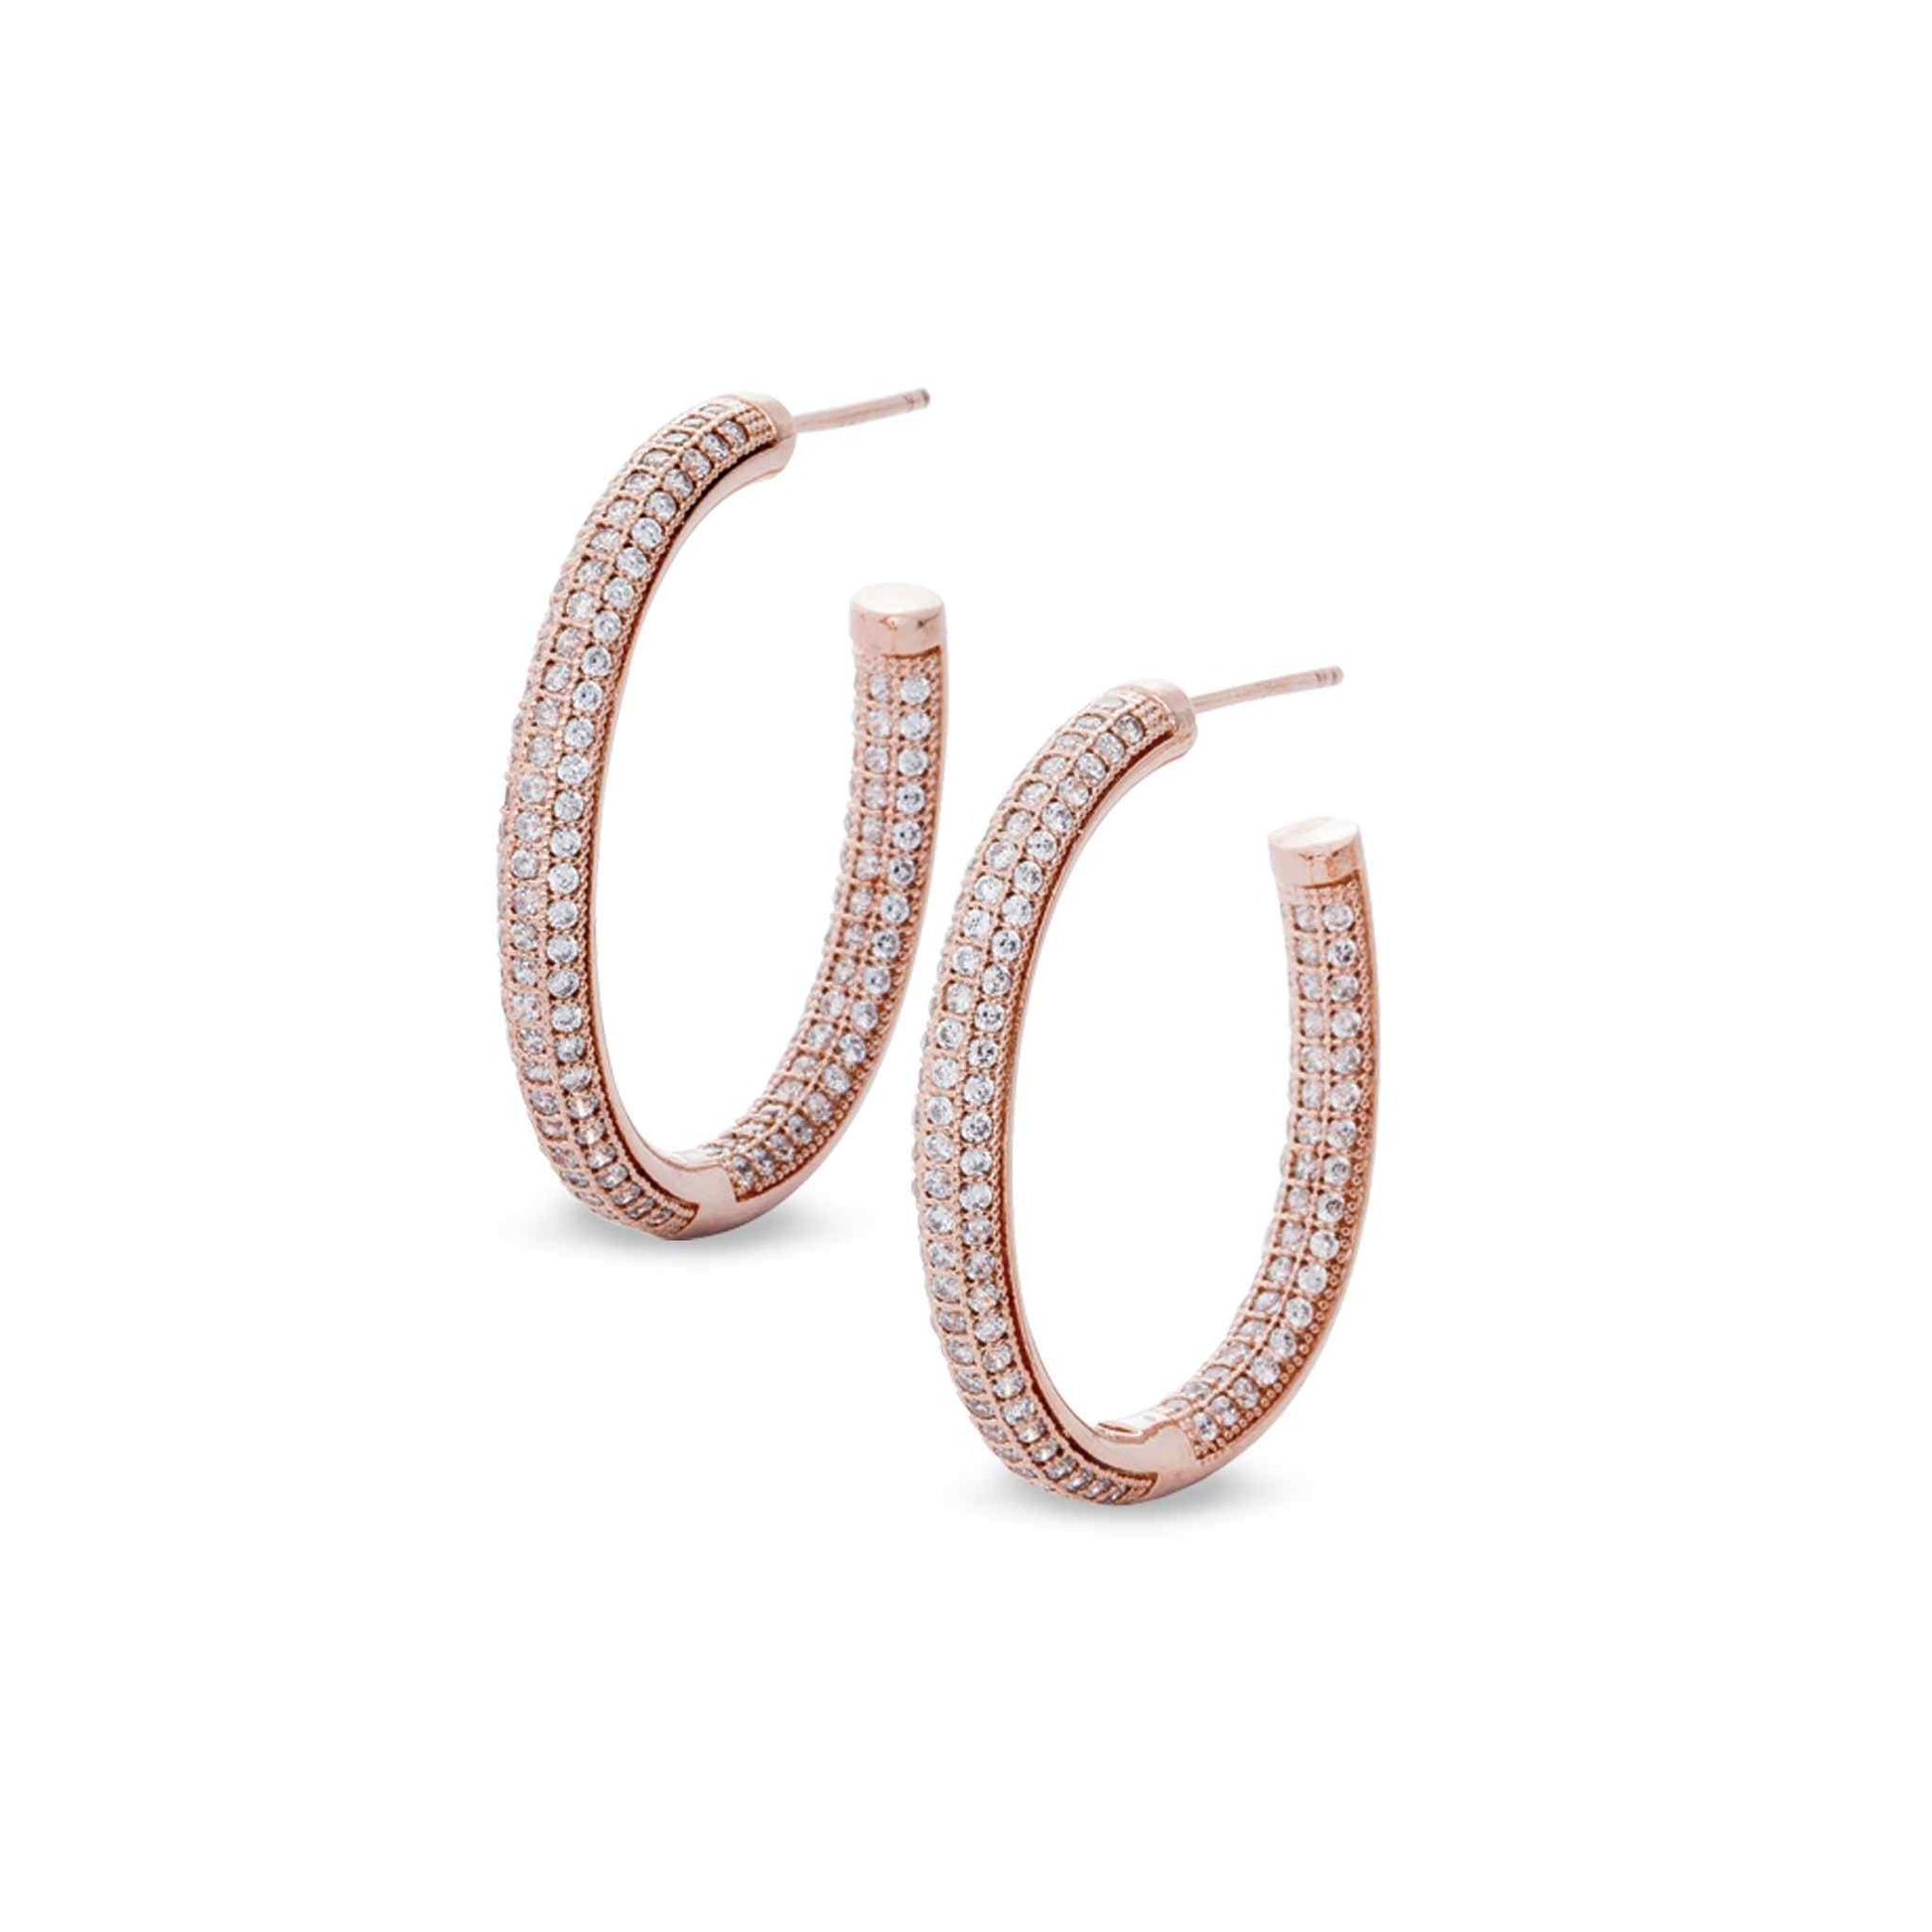 A sterling silver oval inside out hoop earrings with 294 simulated diamonds displayed on a neutral white background.